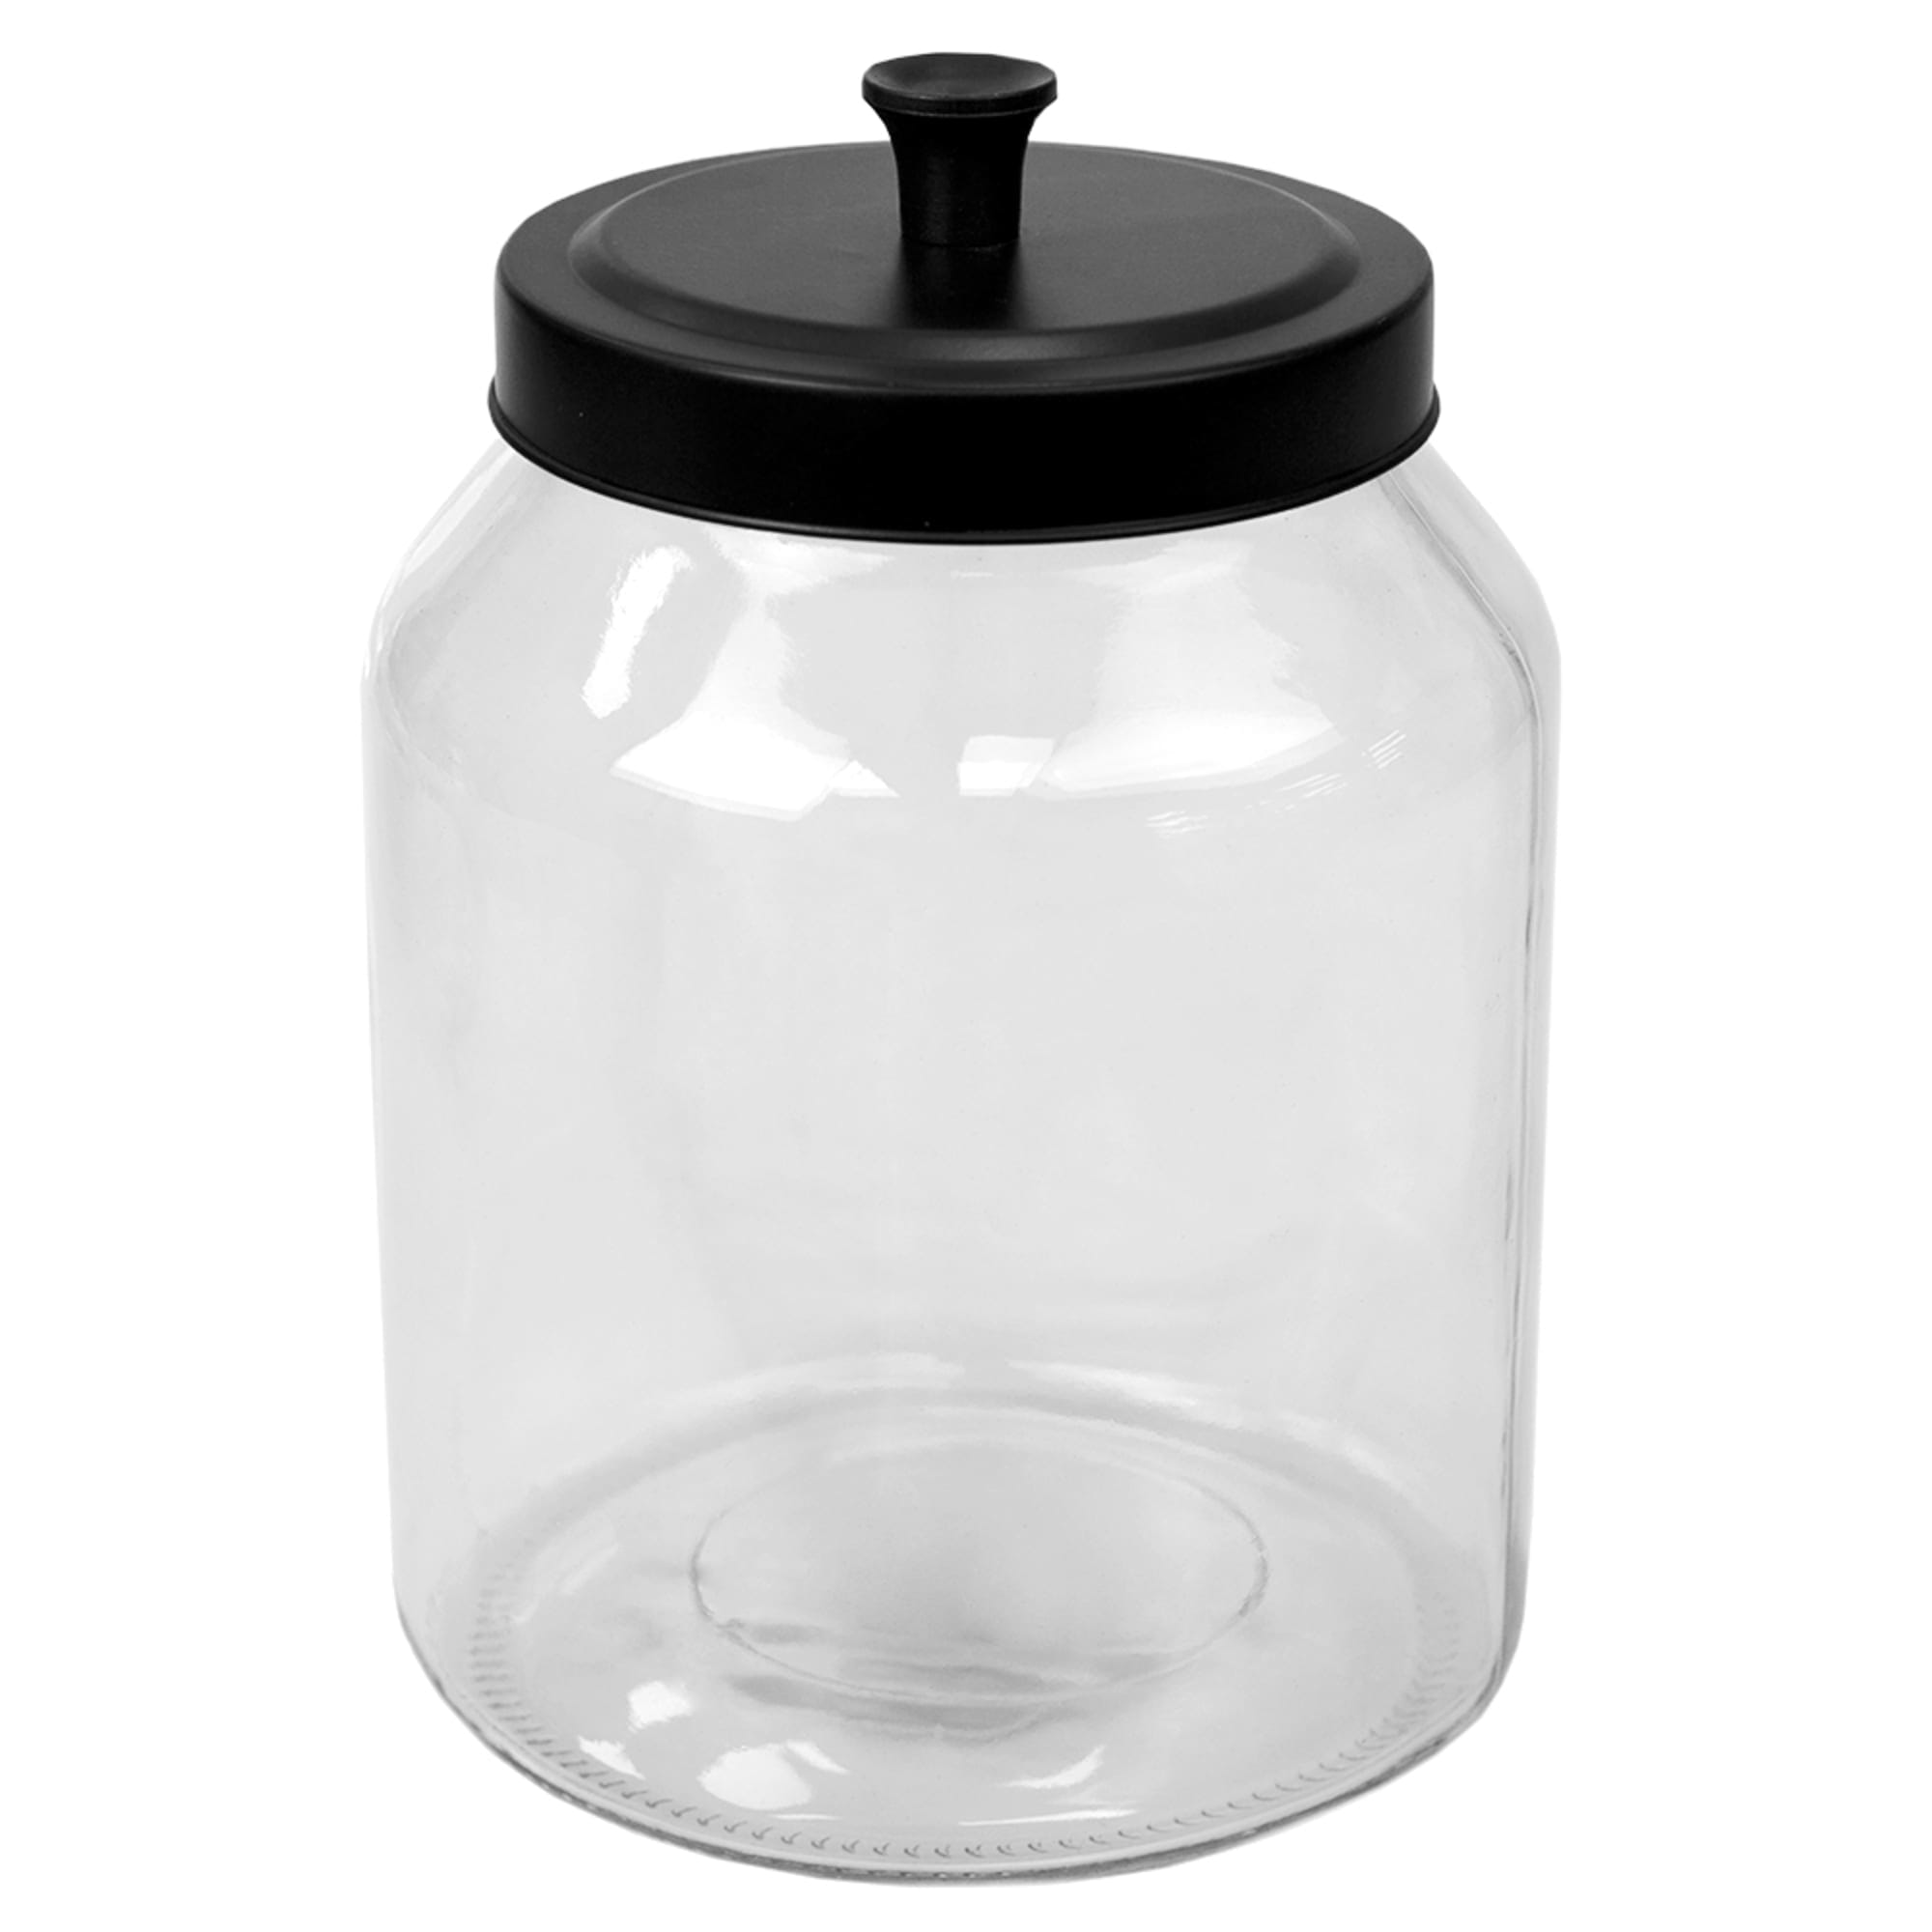 Home Basics Artisan 3 Lt Glass Jar with Black Top $5.00 EACH, CASE PACK OF 4